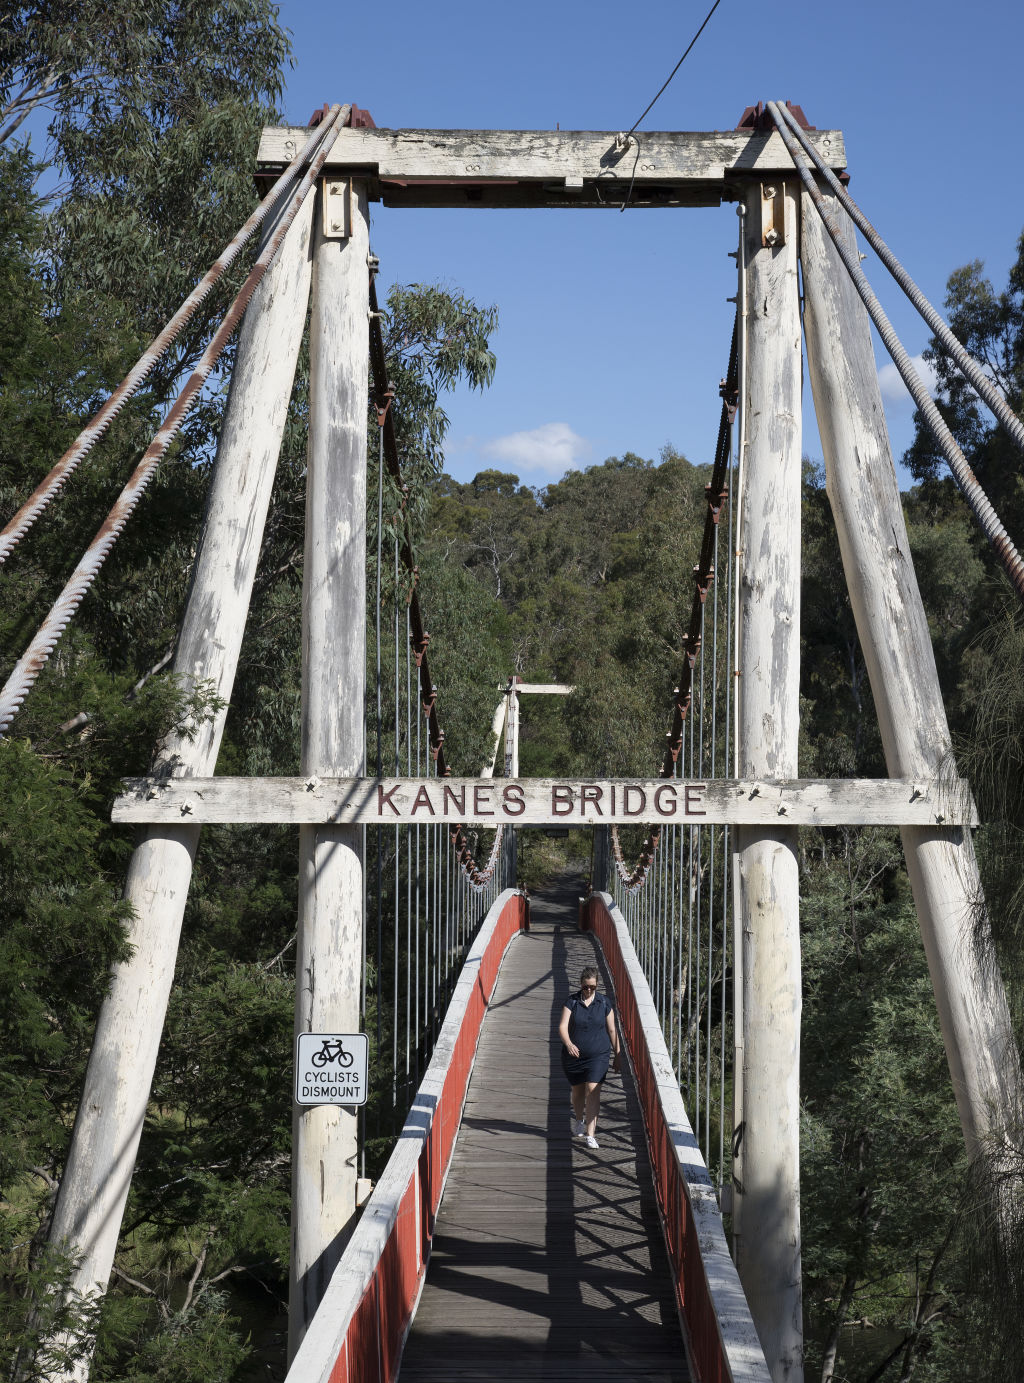 Kanes Bridge takes visitors over the Yarra River. Photo: Leigh Henningham